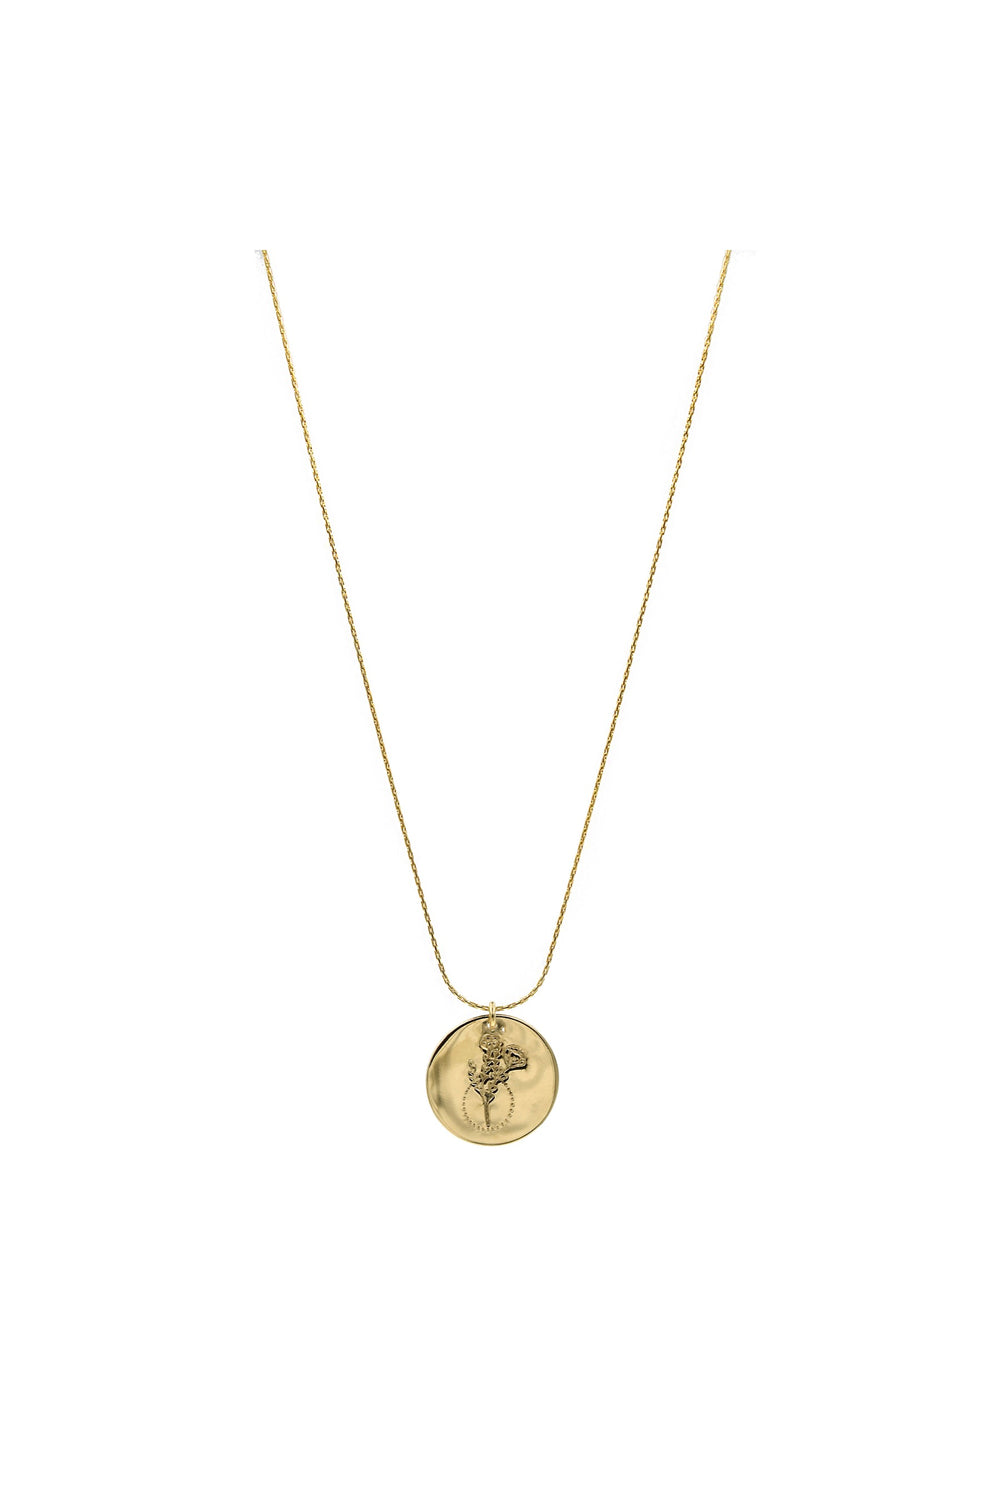 Gold Wildflower Coin Necklace